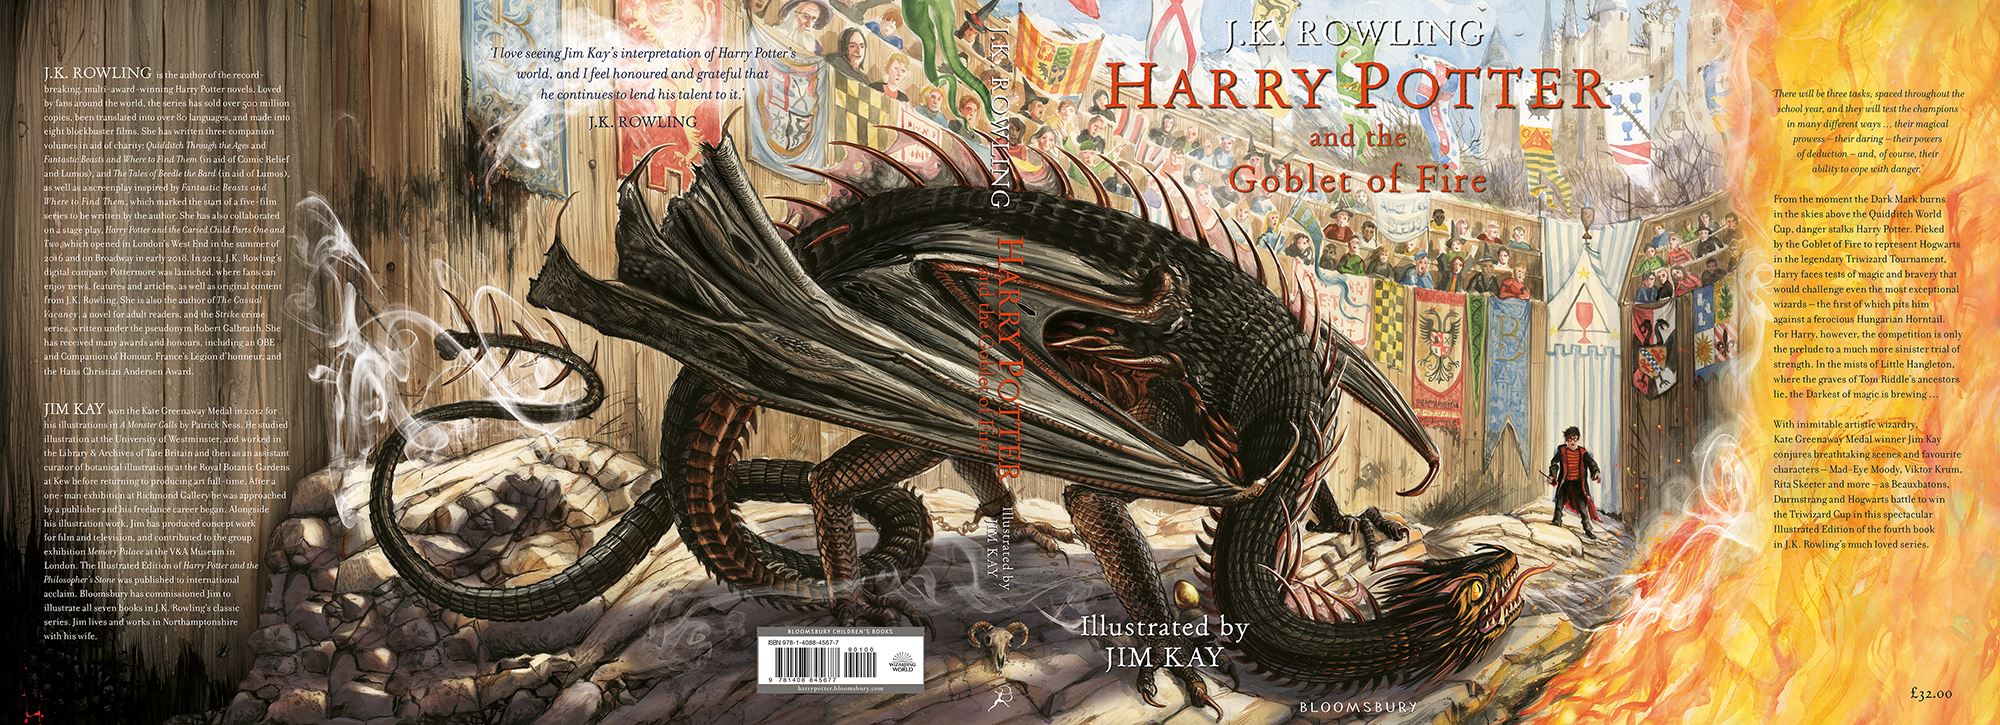 Harry potter and the goblet of fire book cover images